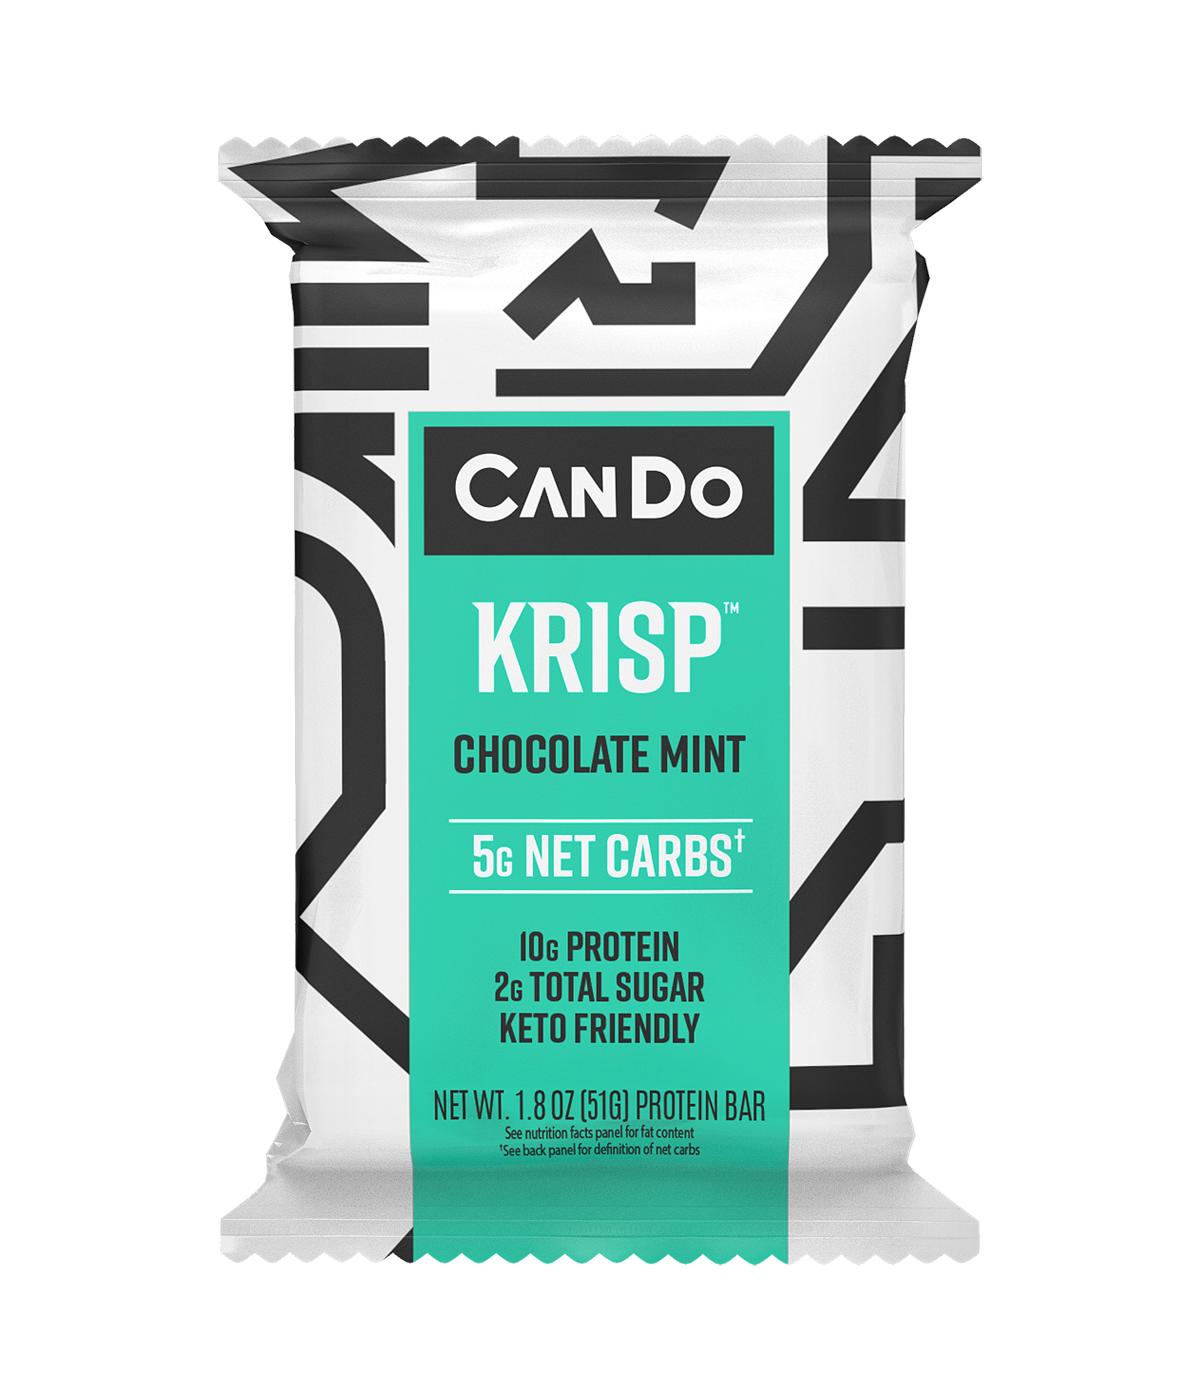 CanDo Krisp 10g Protein Bar - Chocolate Mint; image 1 of 2